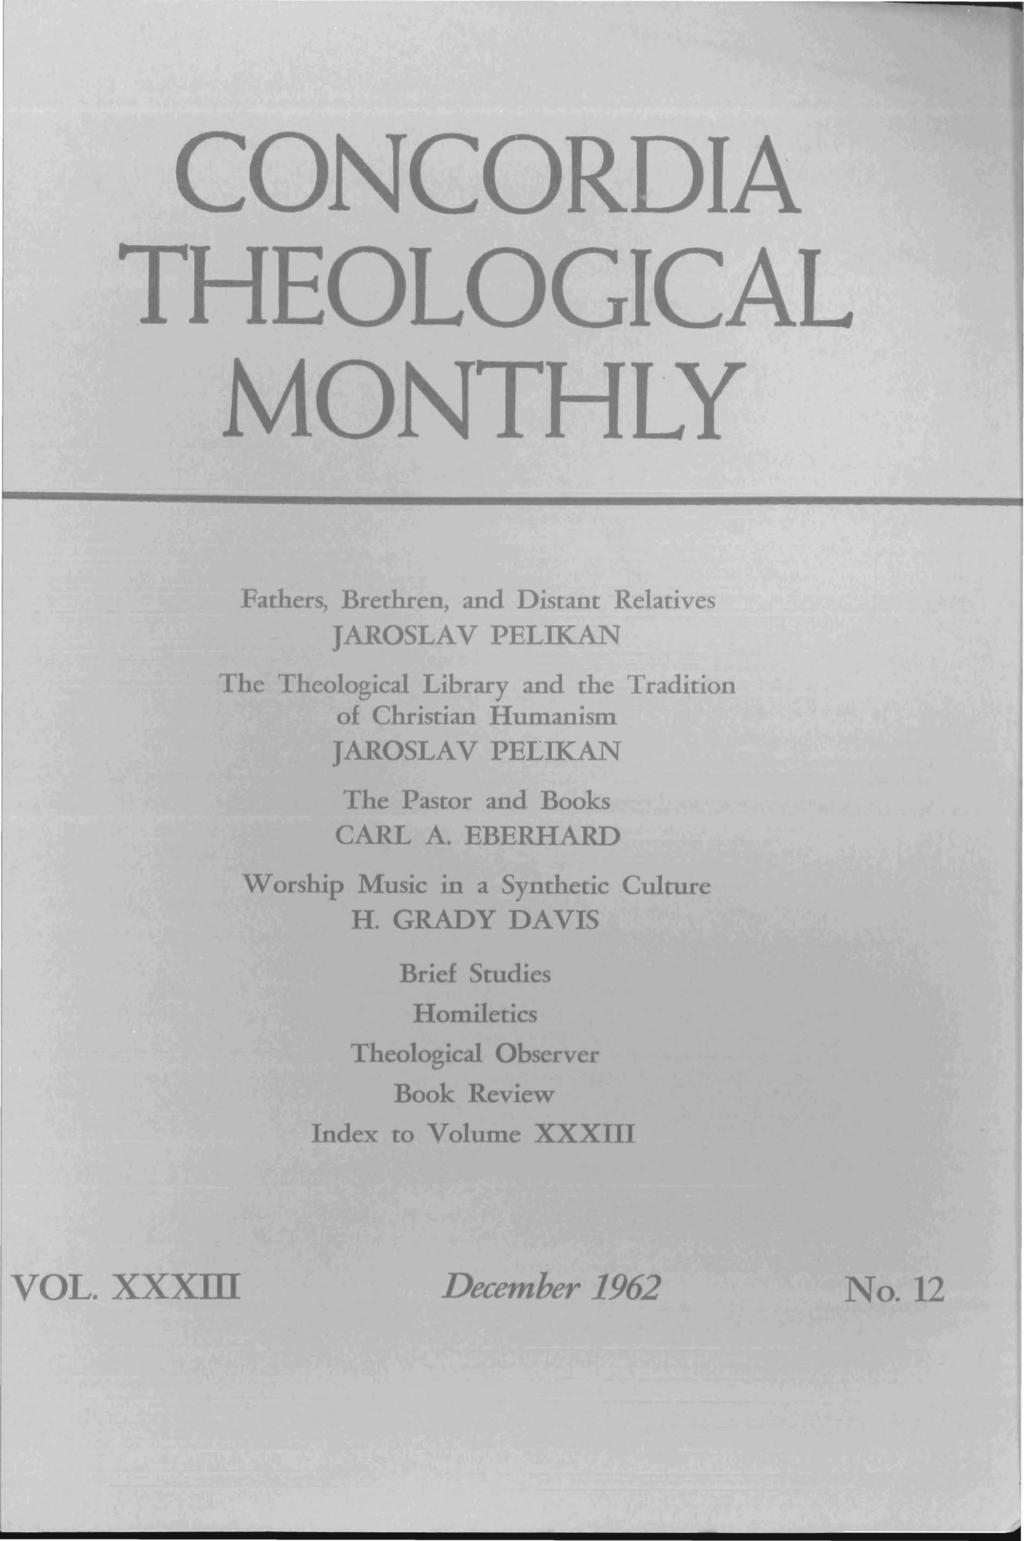 CONCORDIA THEOLOGICAL MONTHLY Fathers, Brethren, and Distant Relatives JAROSLA V PELIKAN The Theological Library and the Tradition of Christian Humanism JAROSLAV PELIKAN The Pasror and